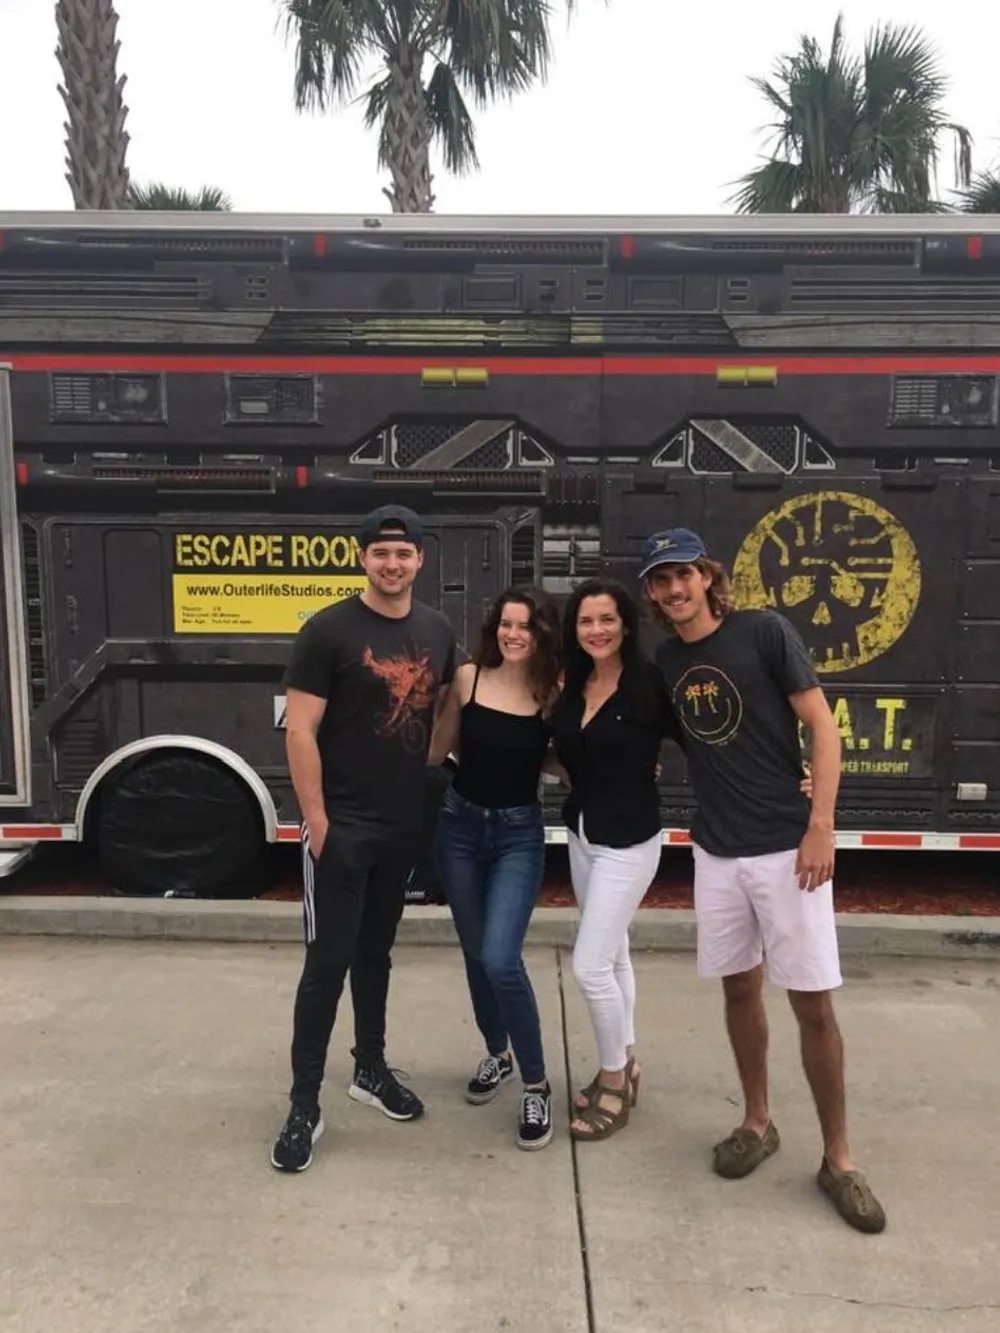 Four people are smiling and posing in front of a vehicle themed as an Escape Room from Outerlife Studios with palm trees in the background